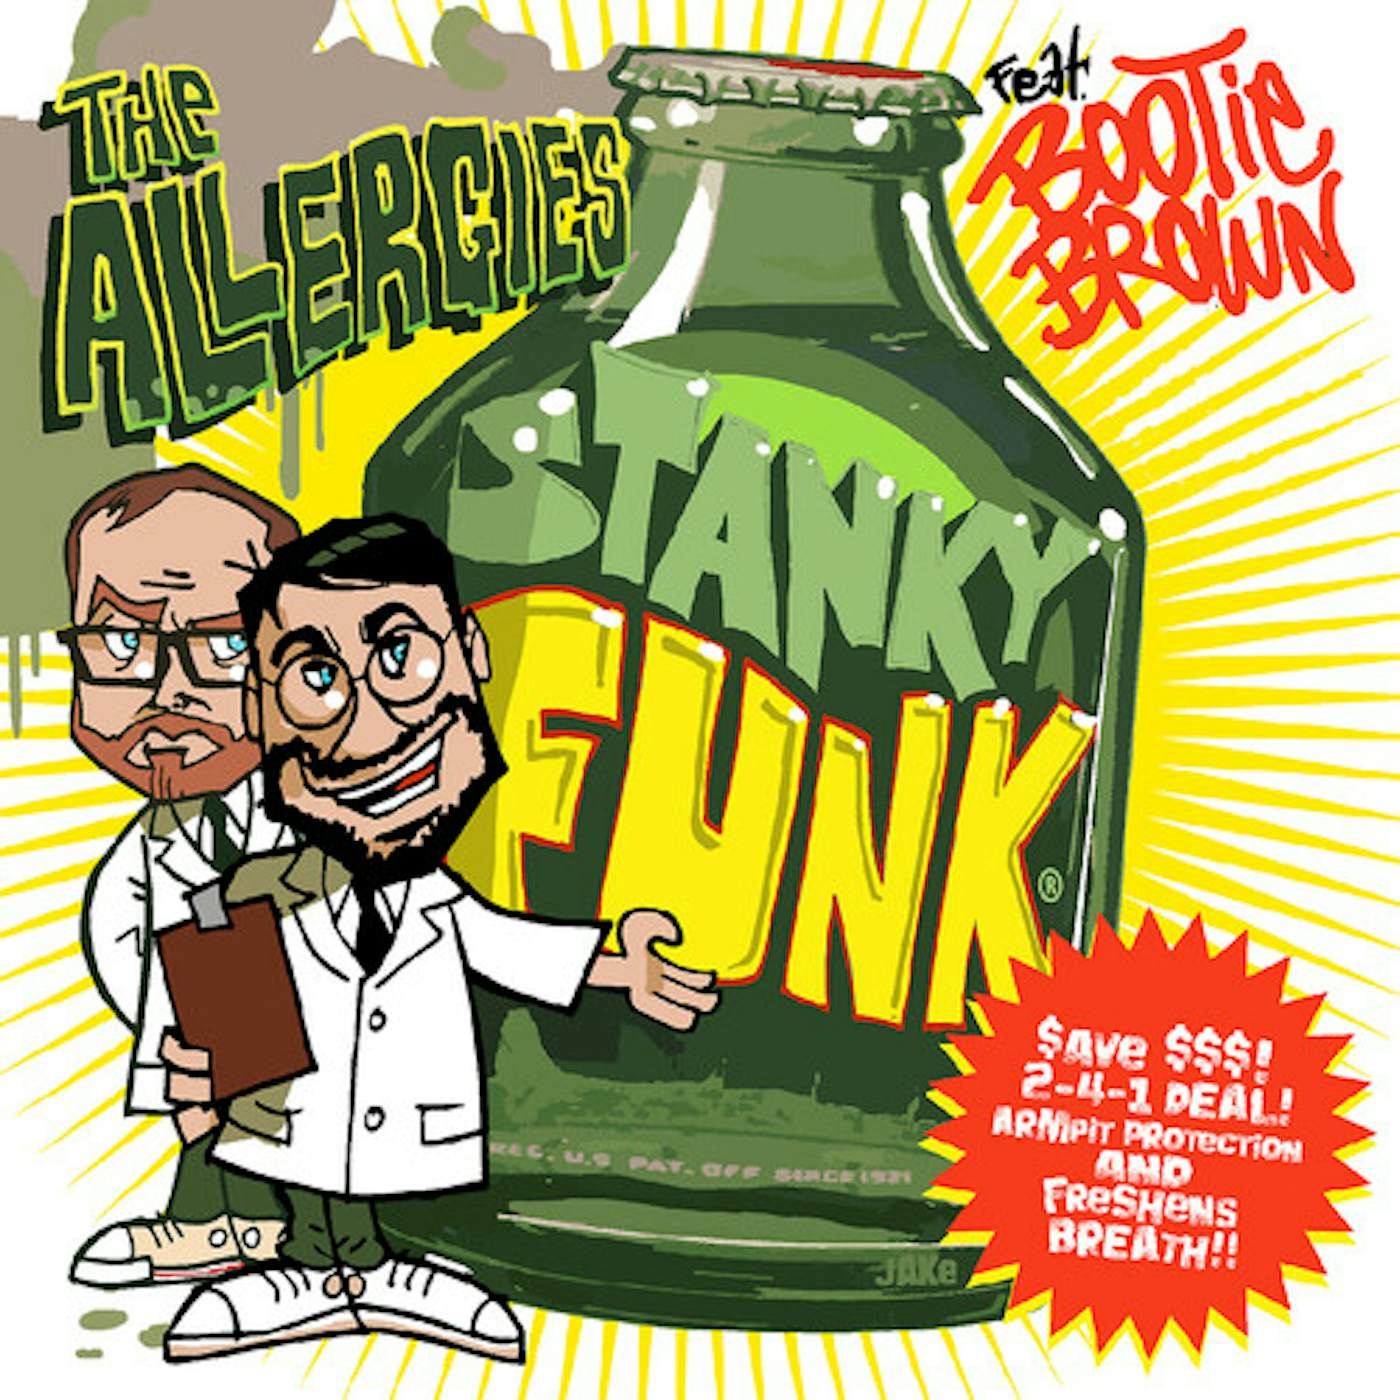 The Allergies Stanky Funk (feat. Bootie Brown) Vinyl Record